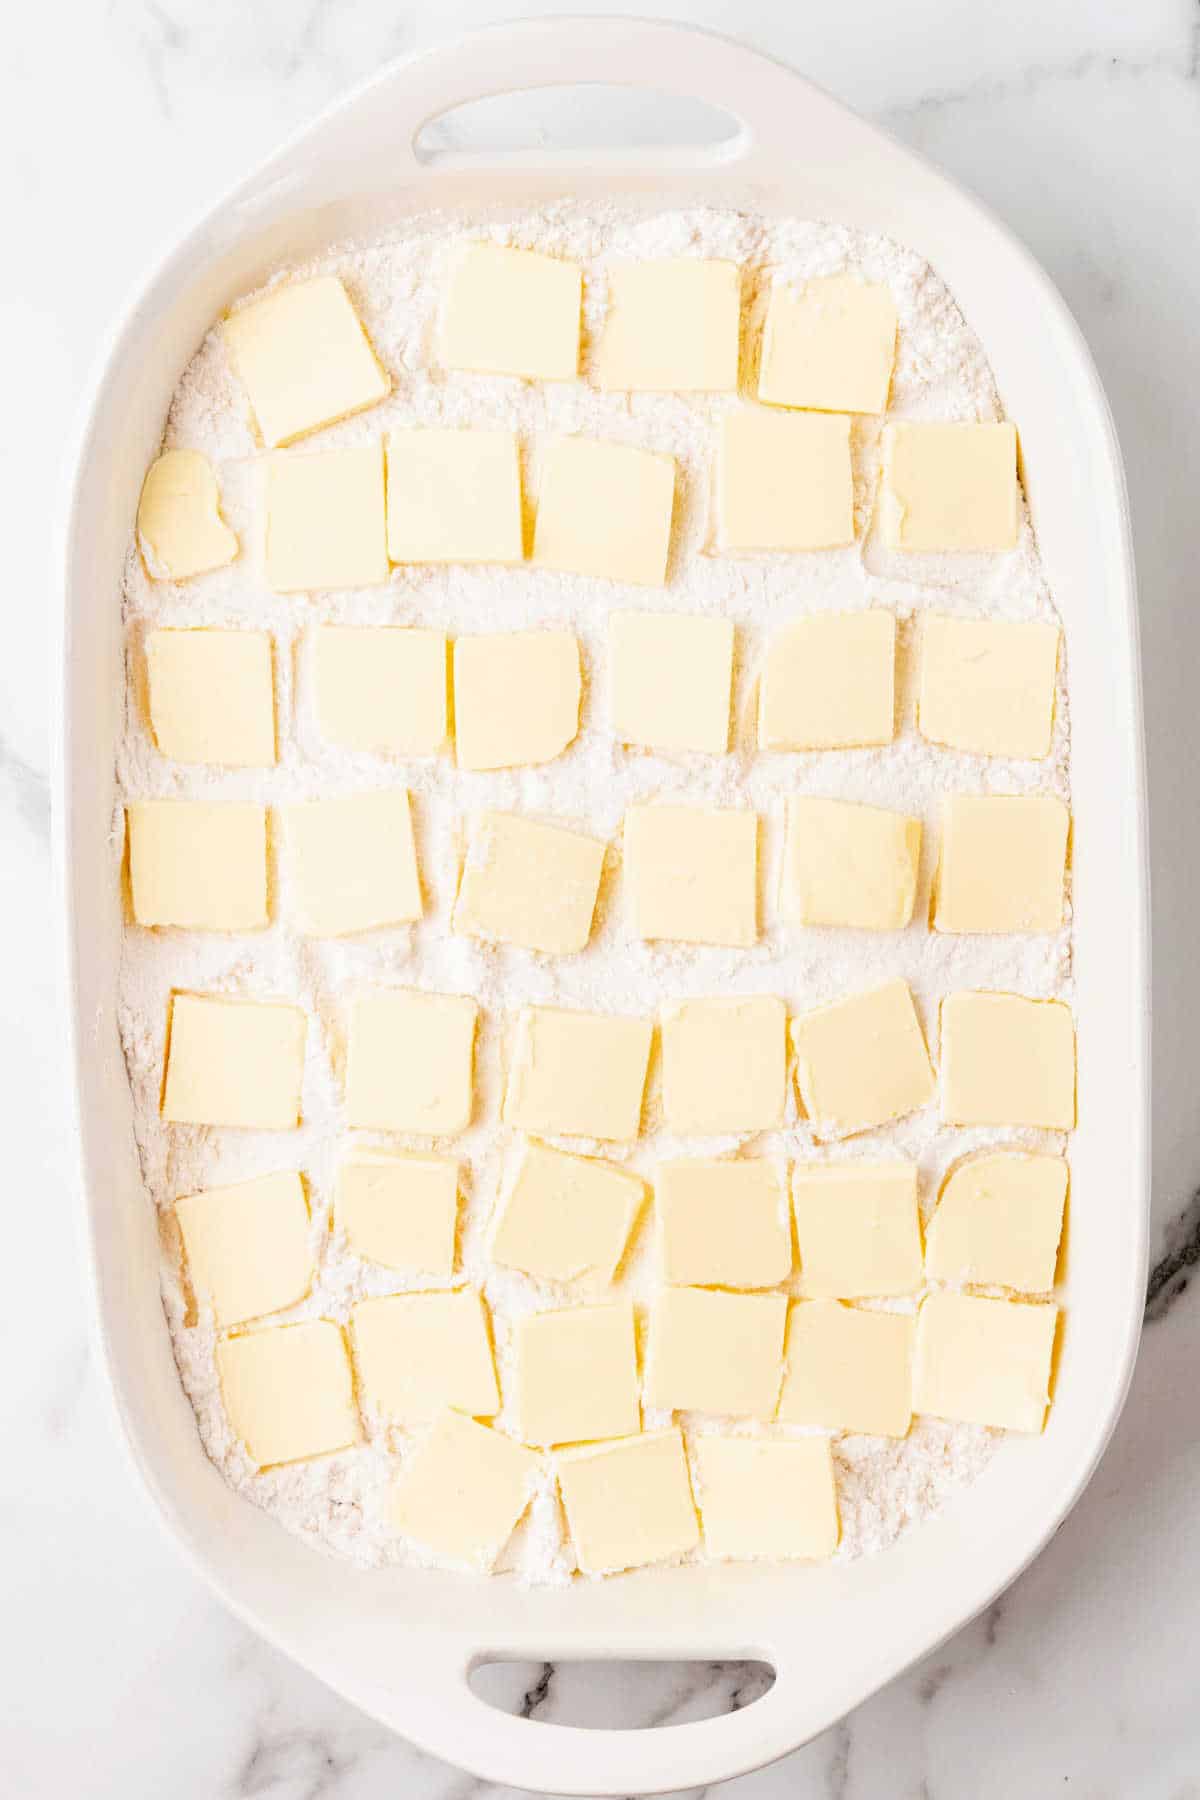 Butter slices on cake mix in a white rectangular dish on a white marble surface.